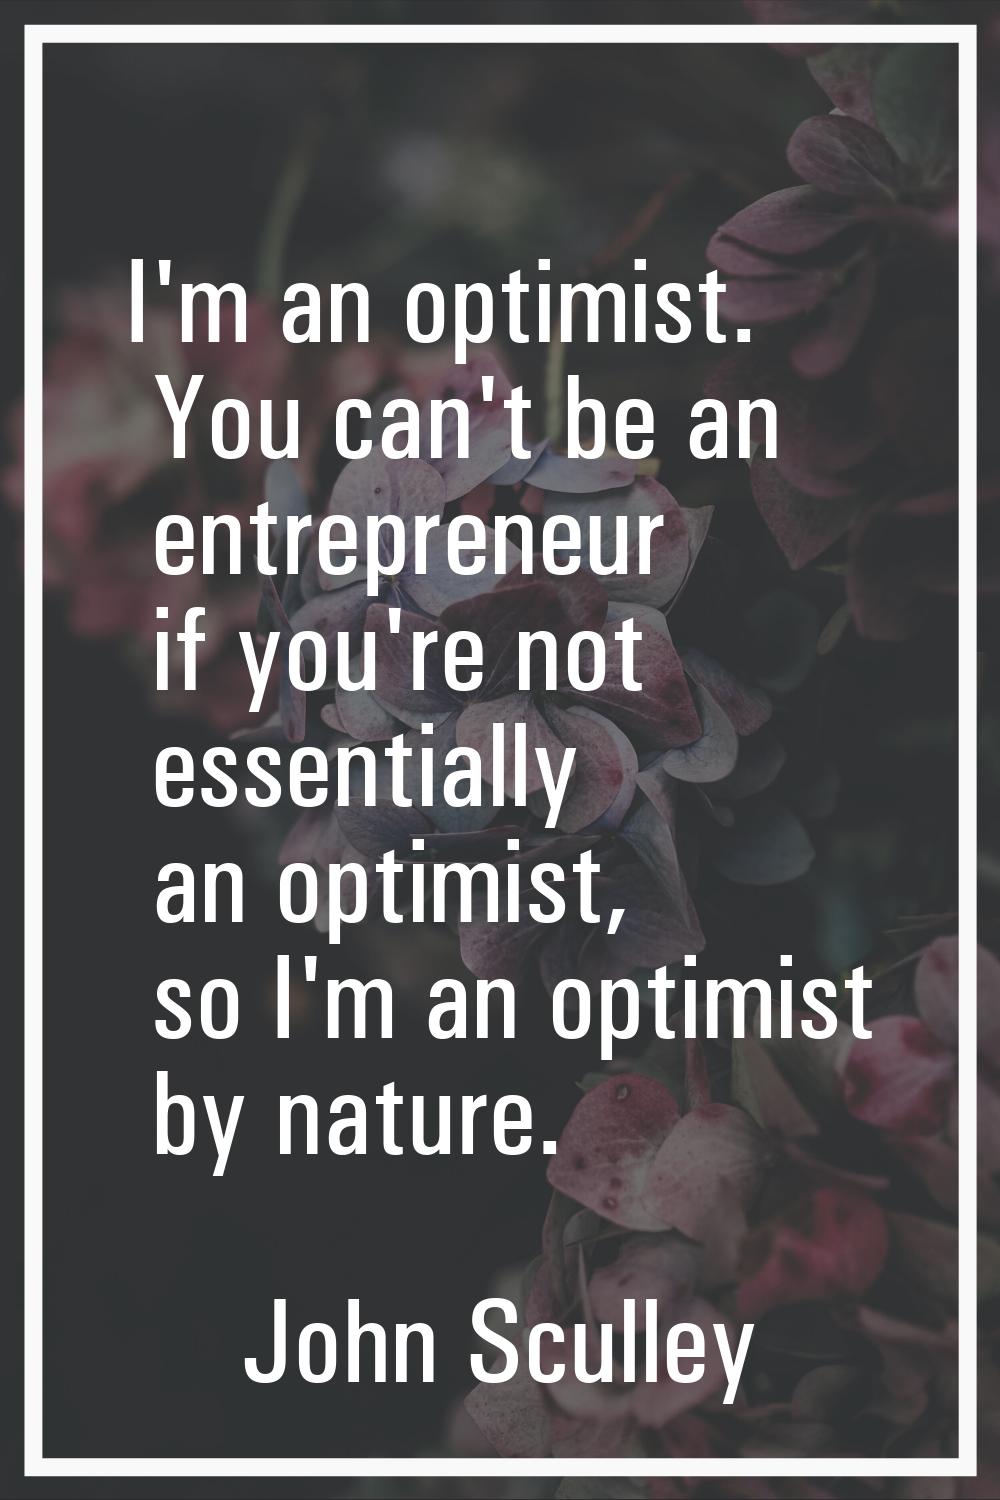 I'm an optimist. You can't be an entrepreneur if you're not essentially an optimist, so I'm an opti